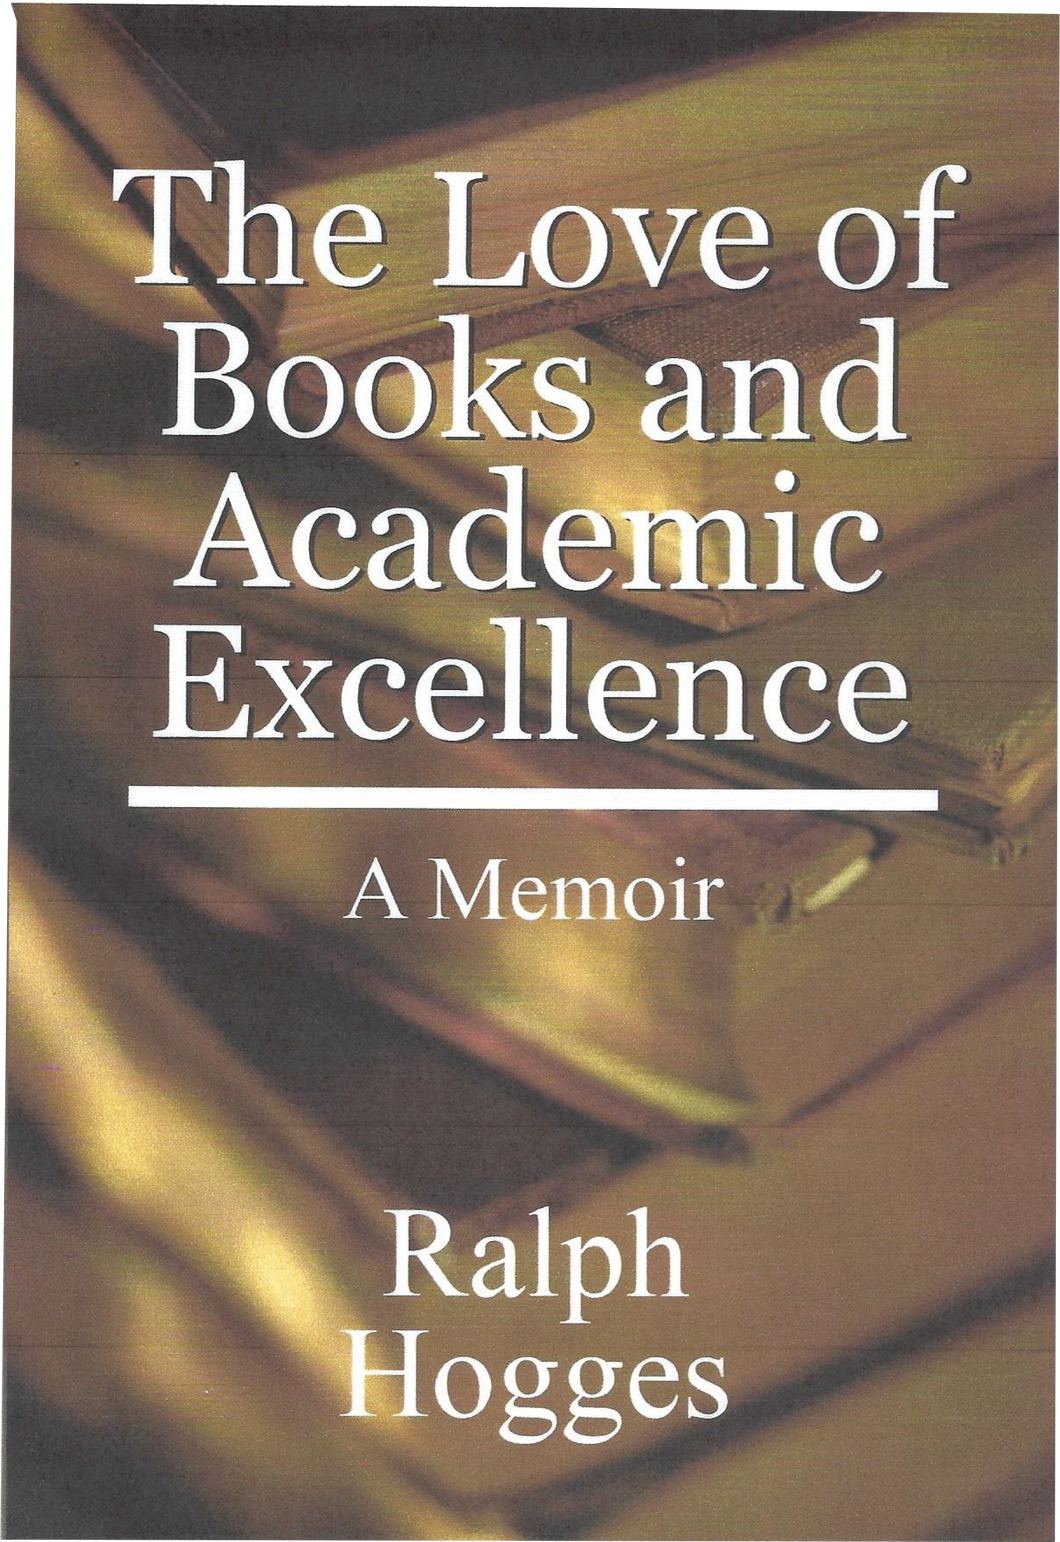 The Love of Books and Academic Excellence: A Memoir (hardcover)